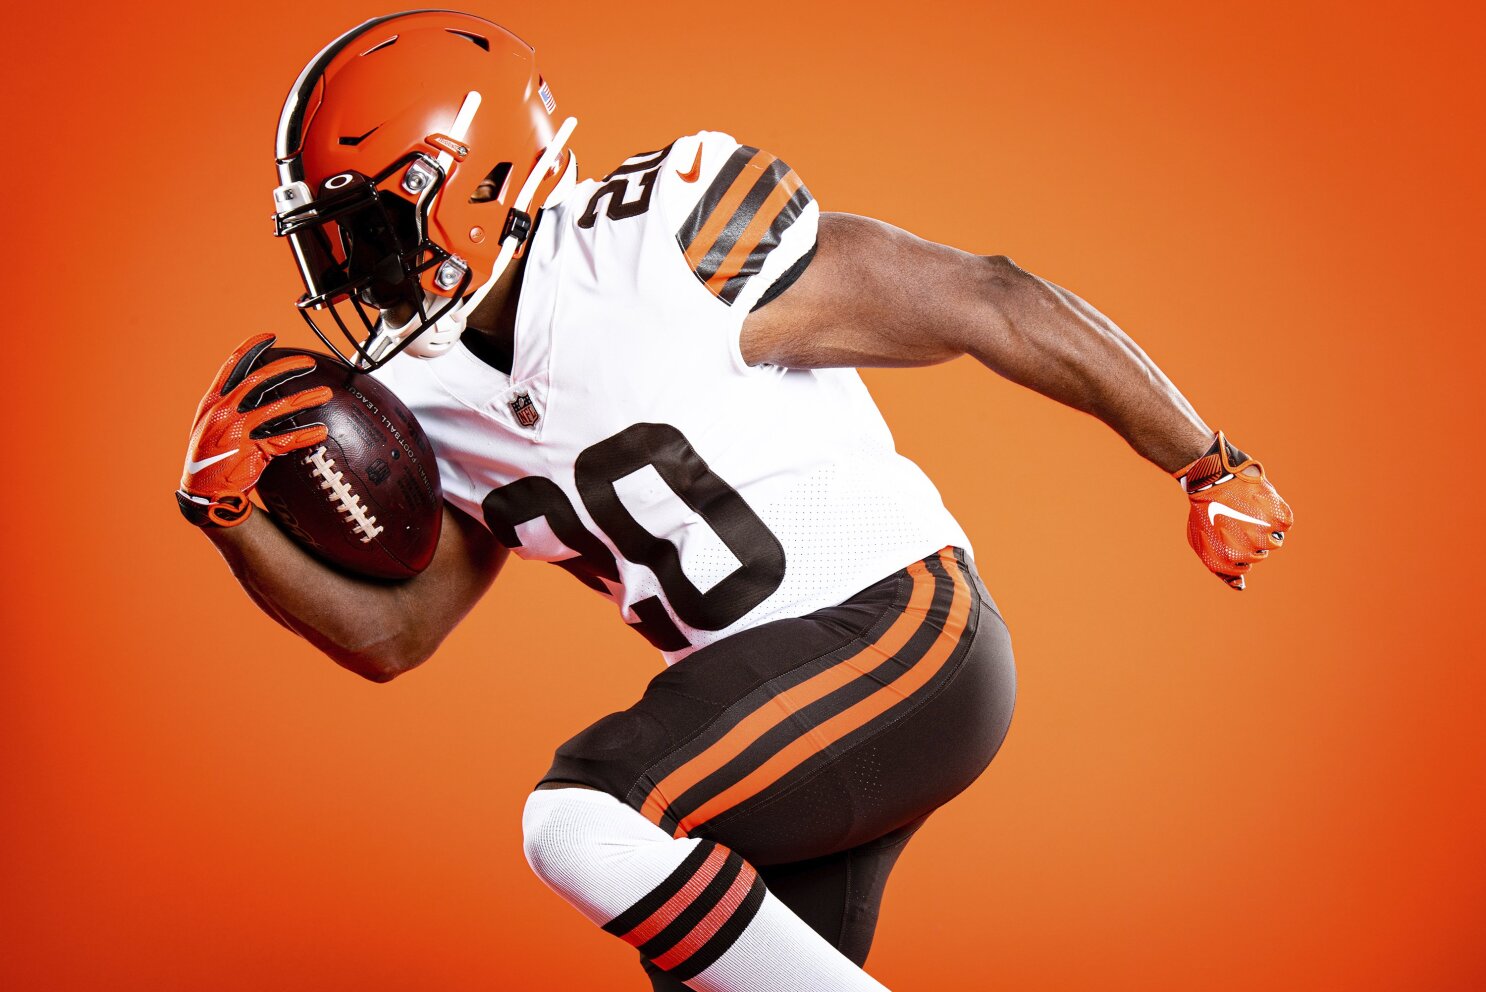 cleveland browns jerseys through the years